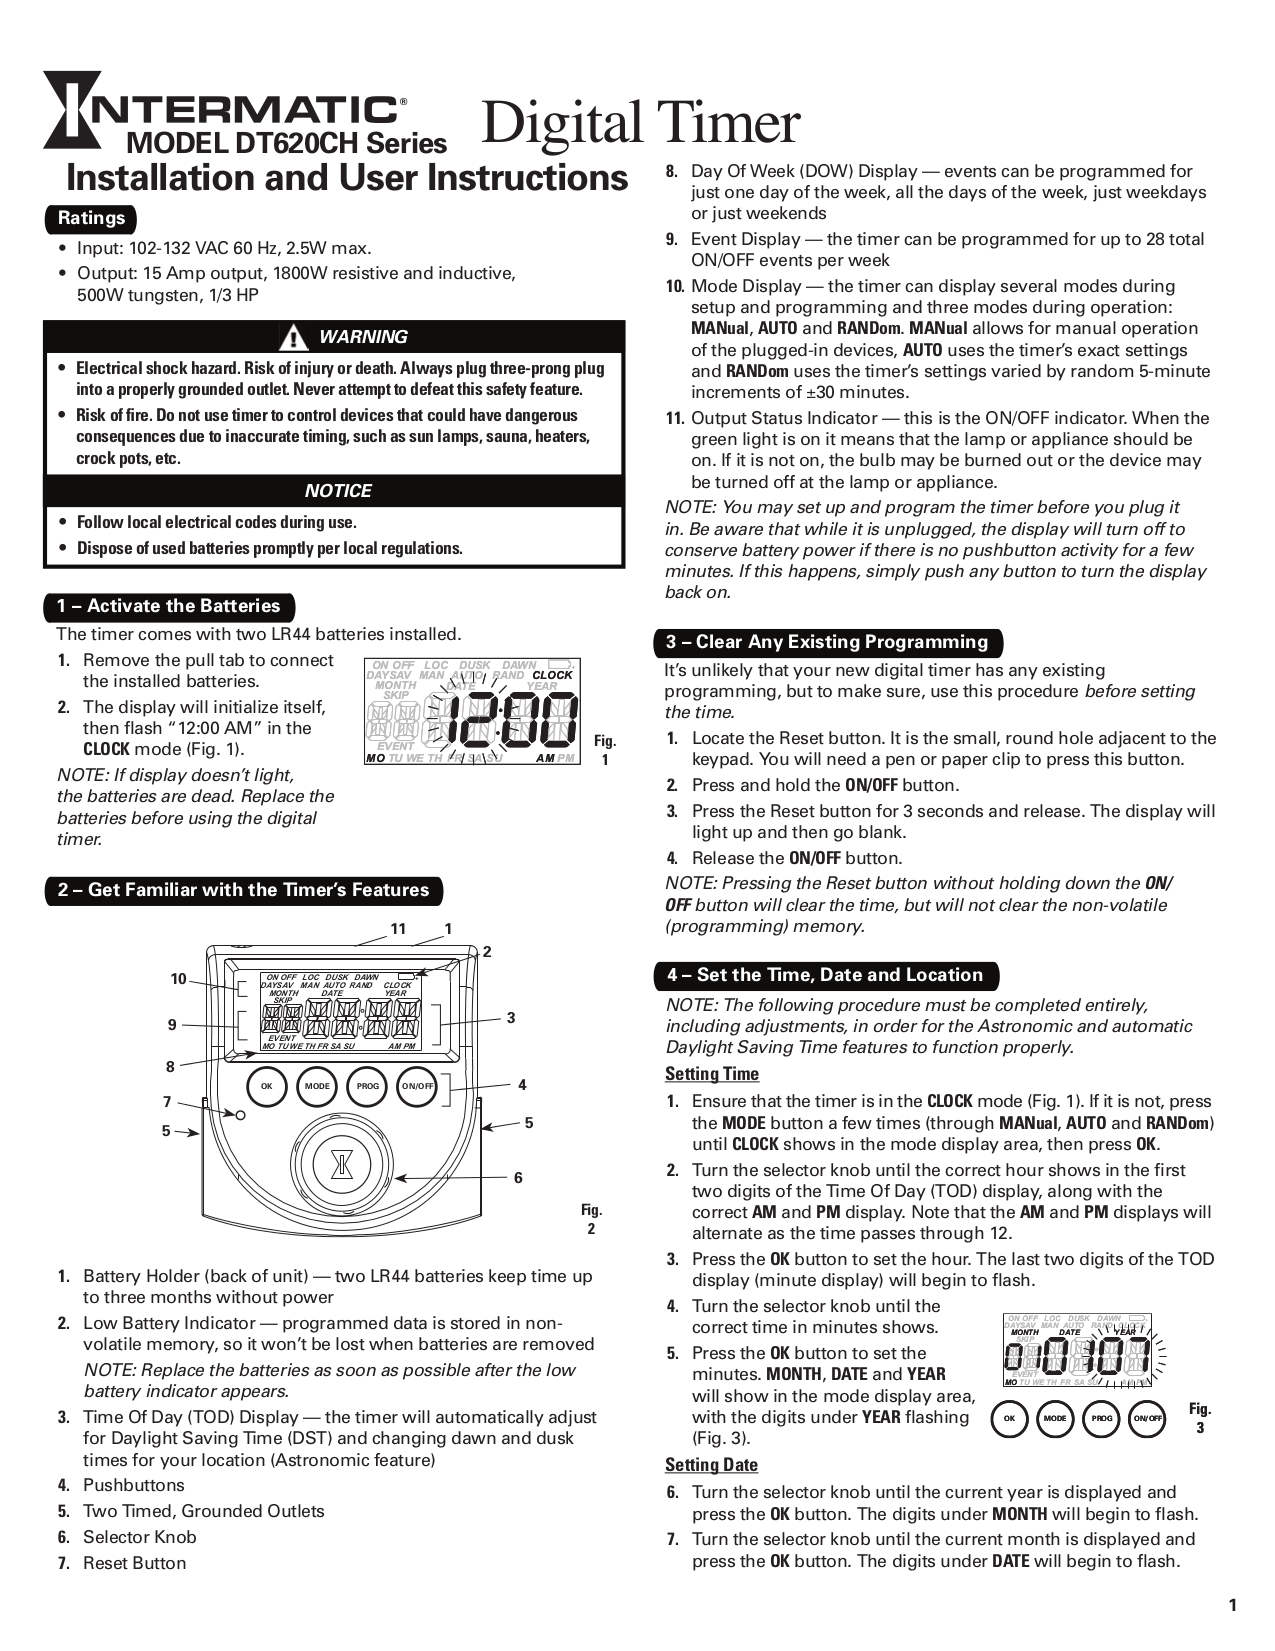 Intermatic Manual Timer Instructions For Use